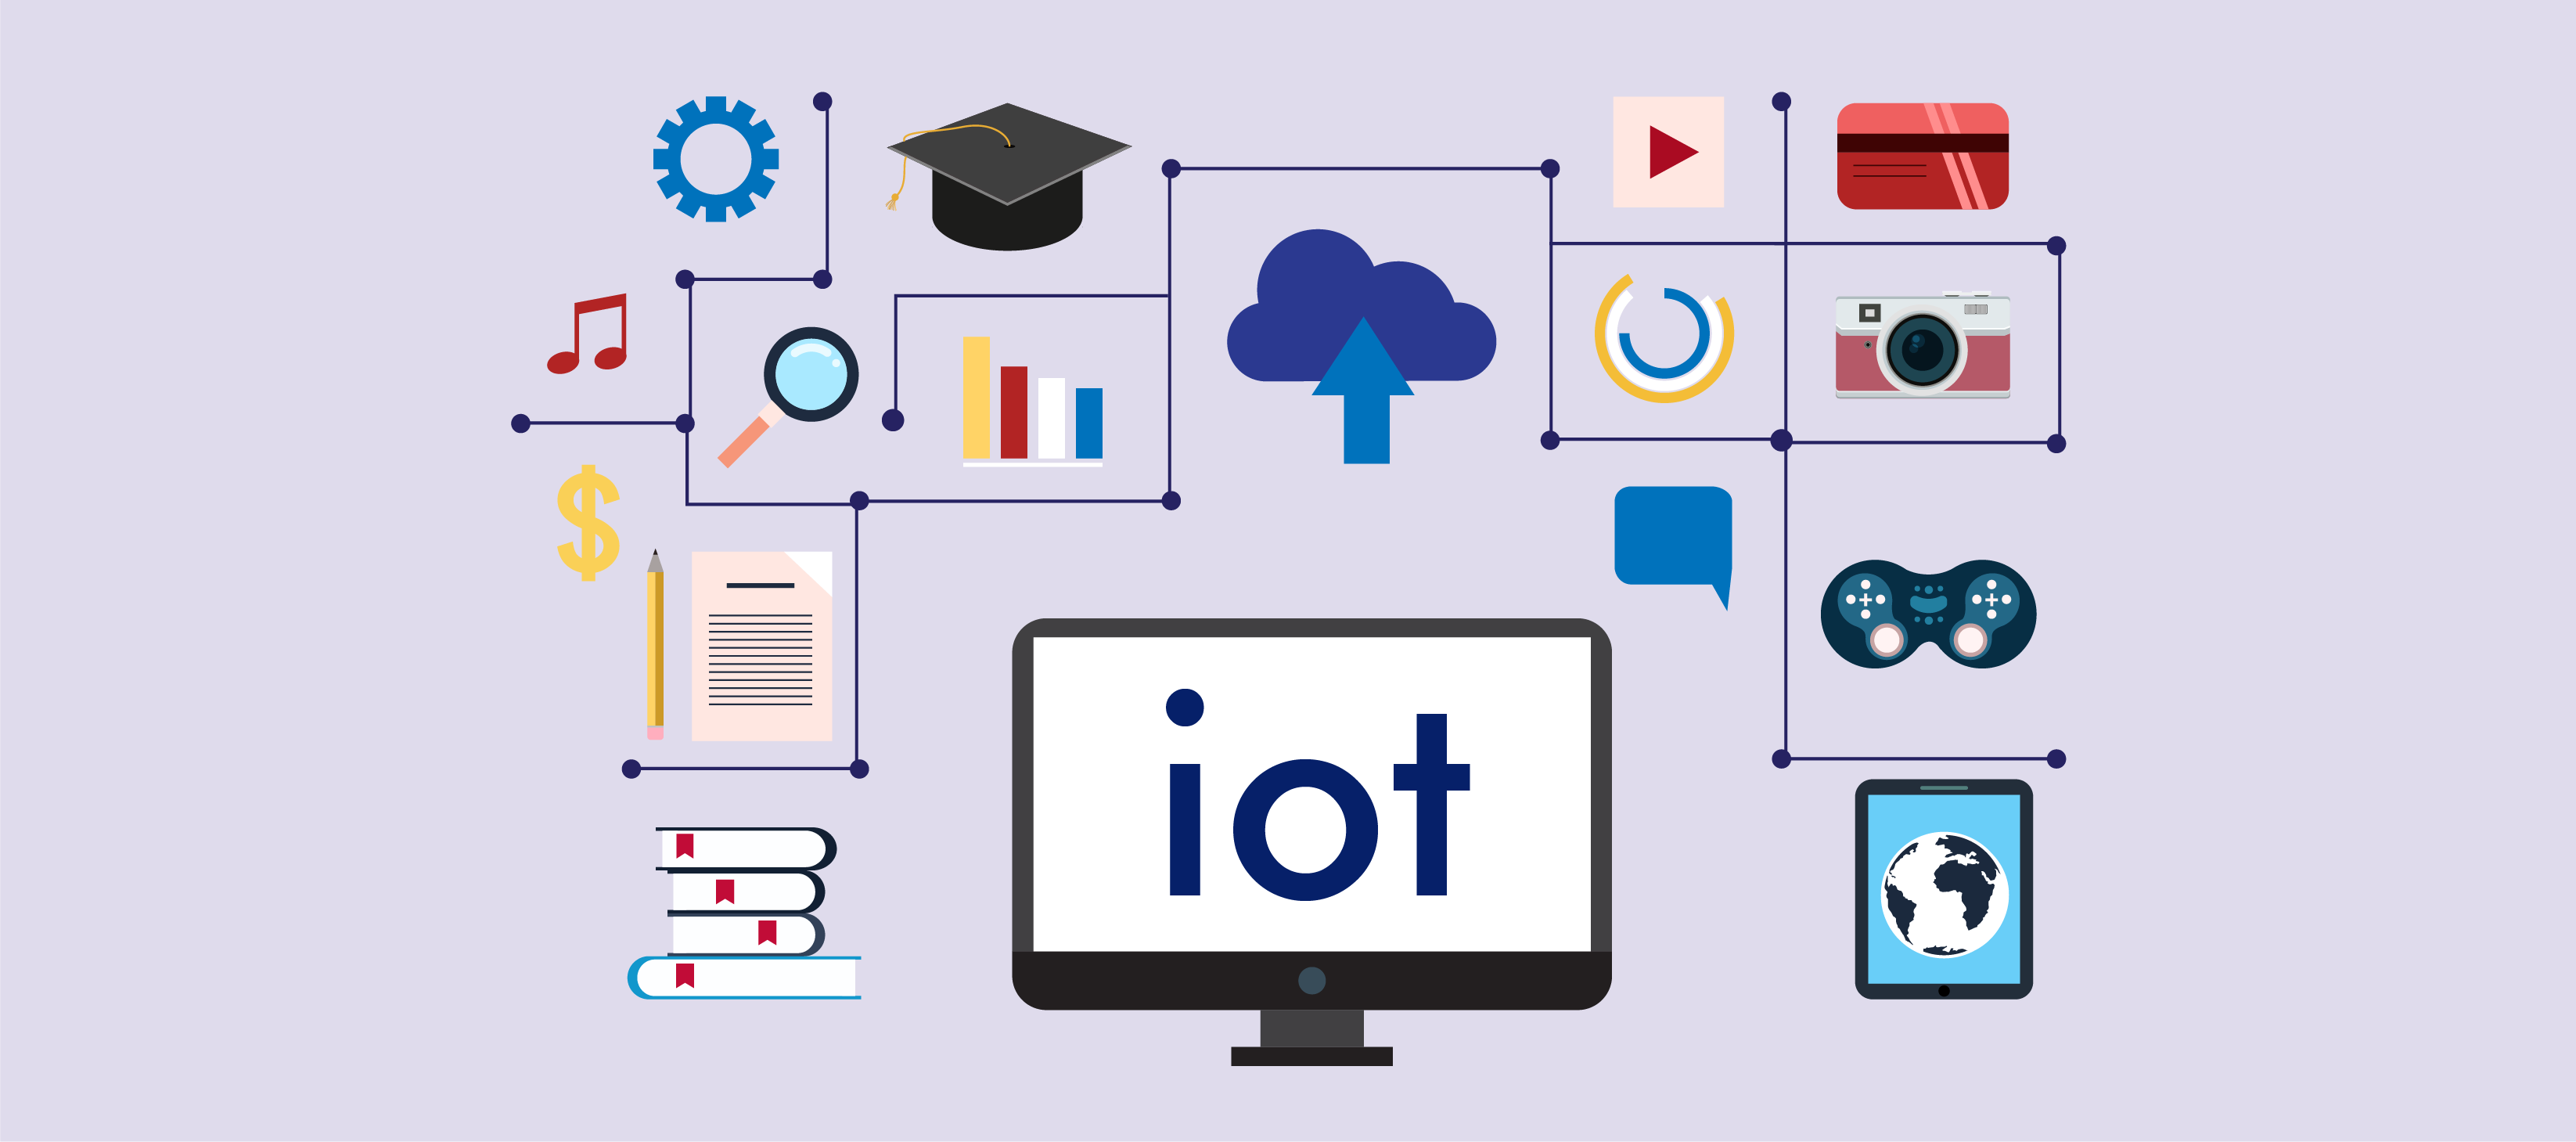 What are most common IoT applications